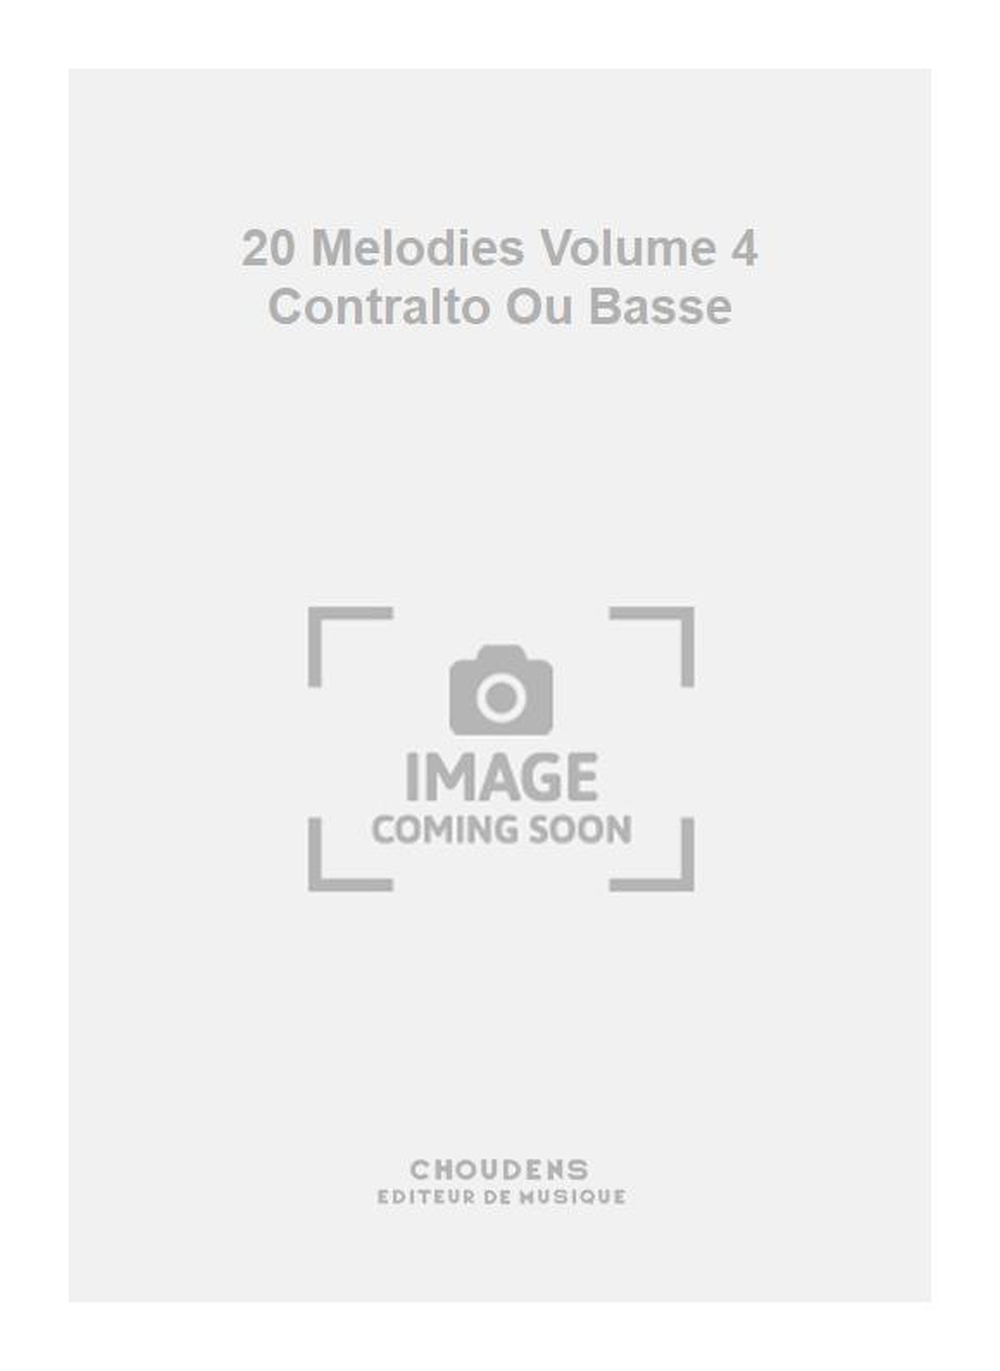 Charles Gounod: 20 Melodies Volume 4 Contralto Ou Basse